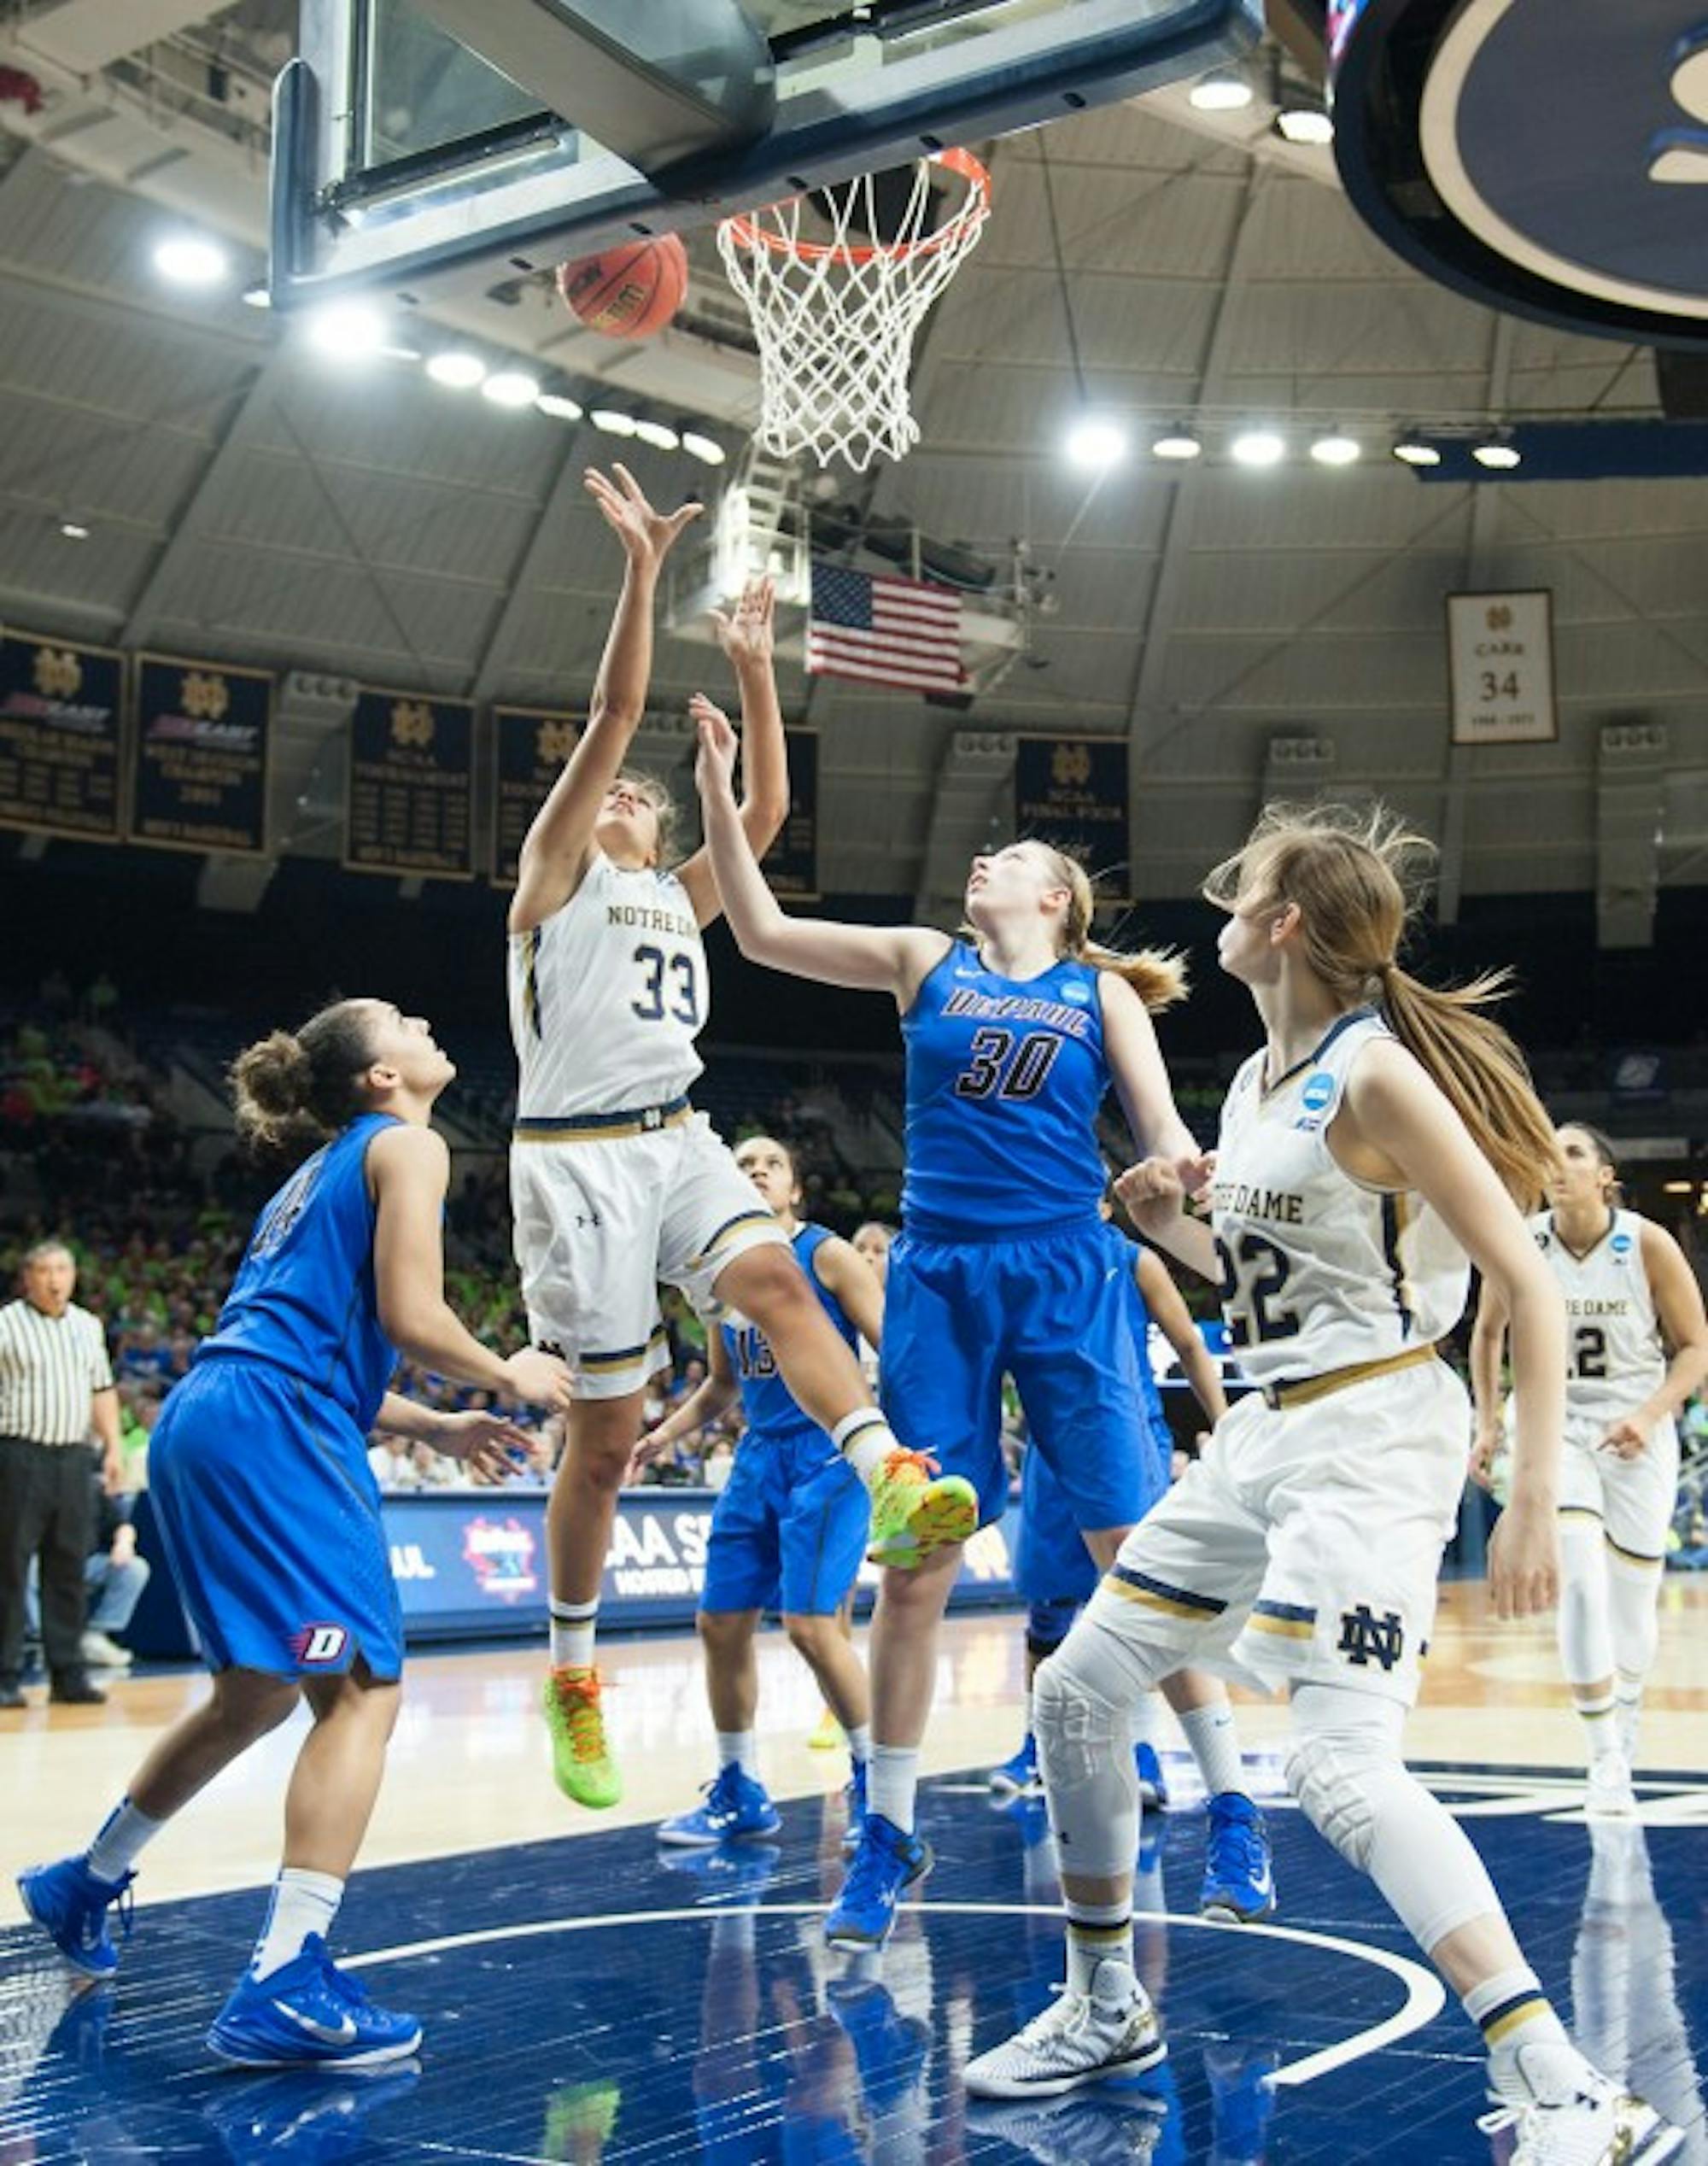 Irish freshman forward Kathryn Westbeld goes up for a shot during Notre Dame's 79-67 win over Depaul on Sunday at Purcell Pavilion.